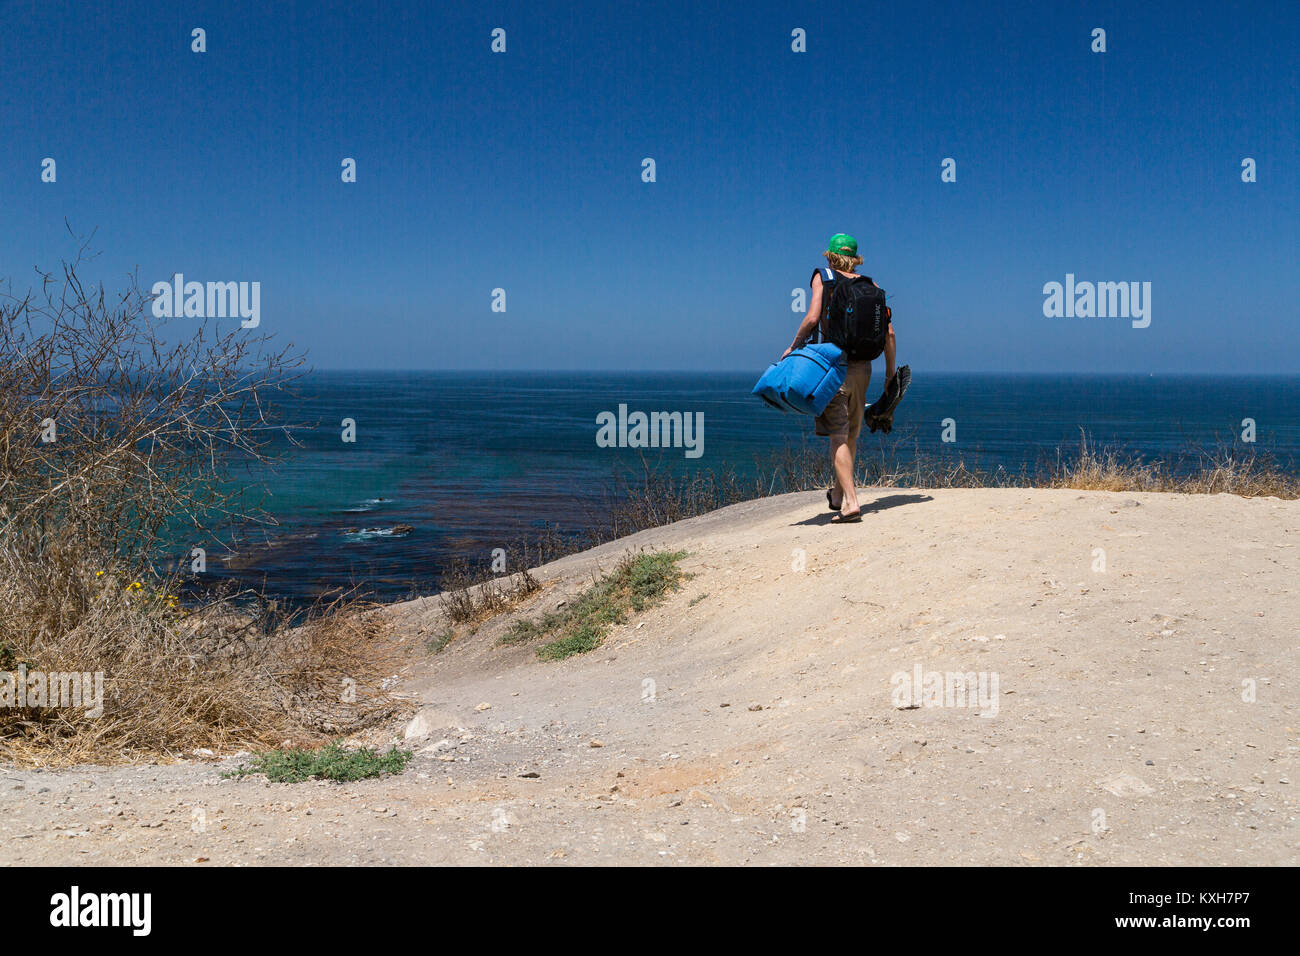 A diver carries gear down a dirt trail to the ocean in Southern California. Stock Photo